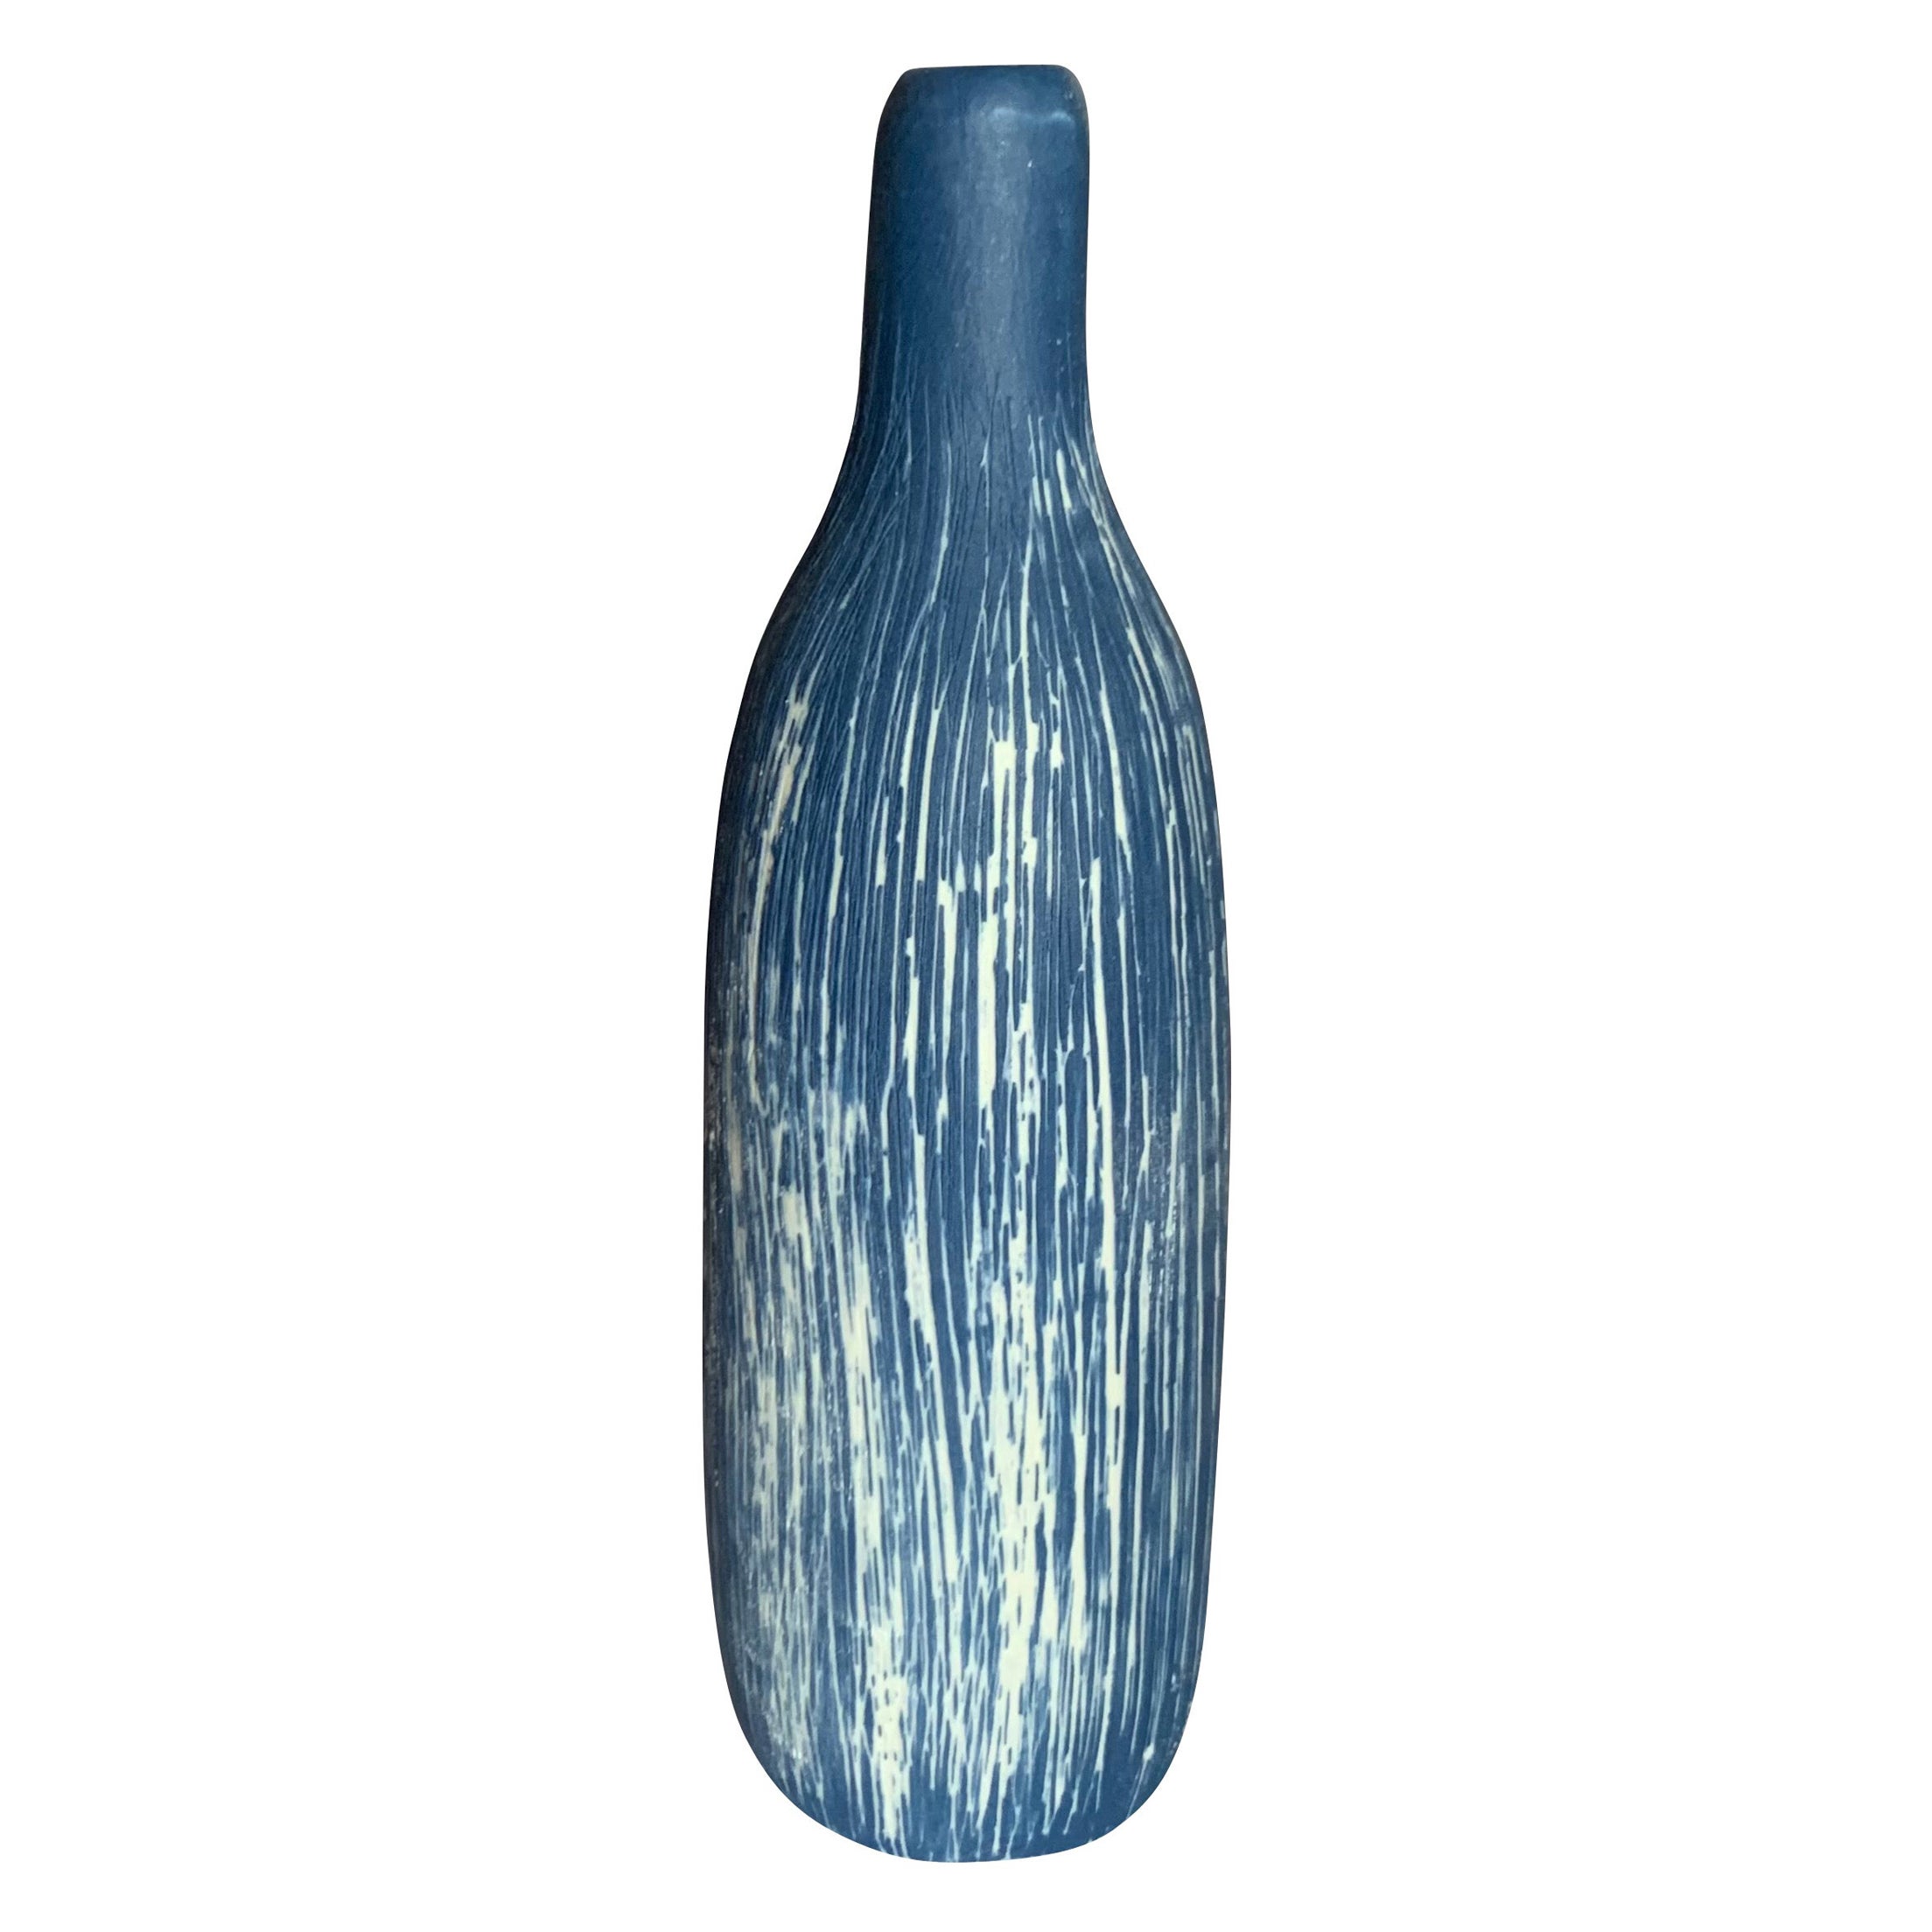 Blue and White Vertical Lines Ceramic Vase, Italy, Contemporary